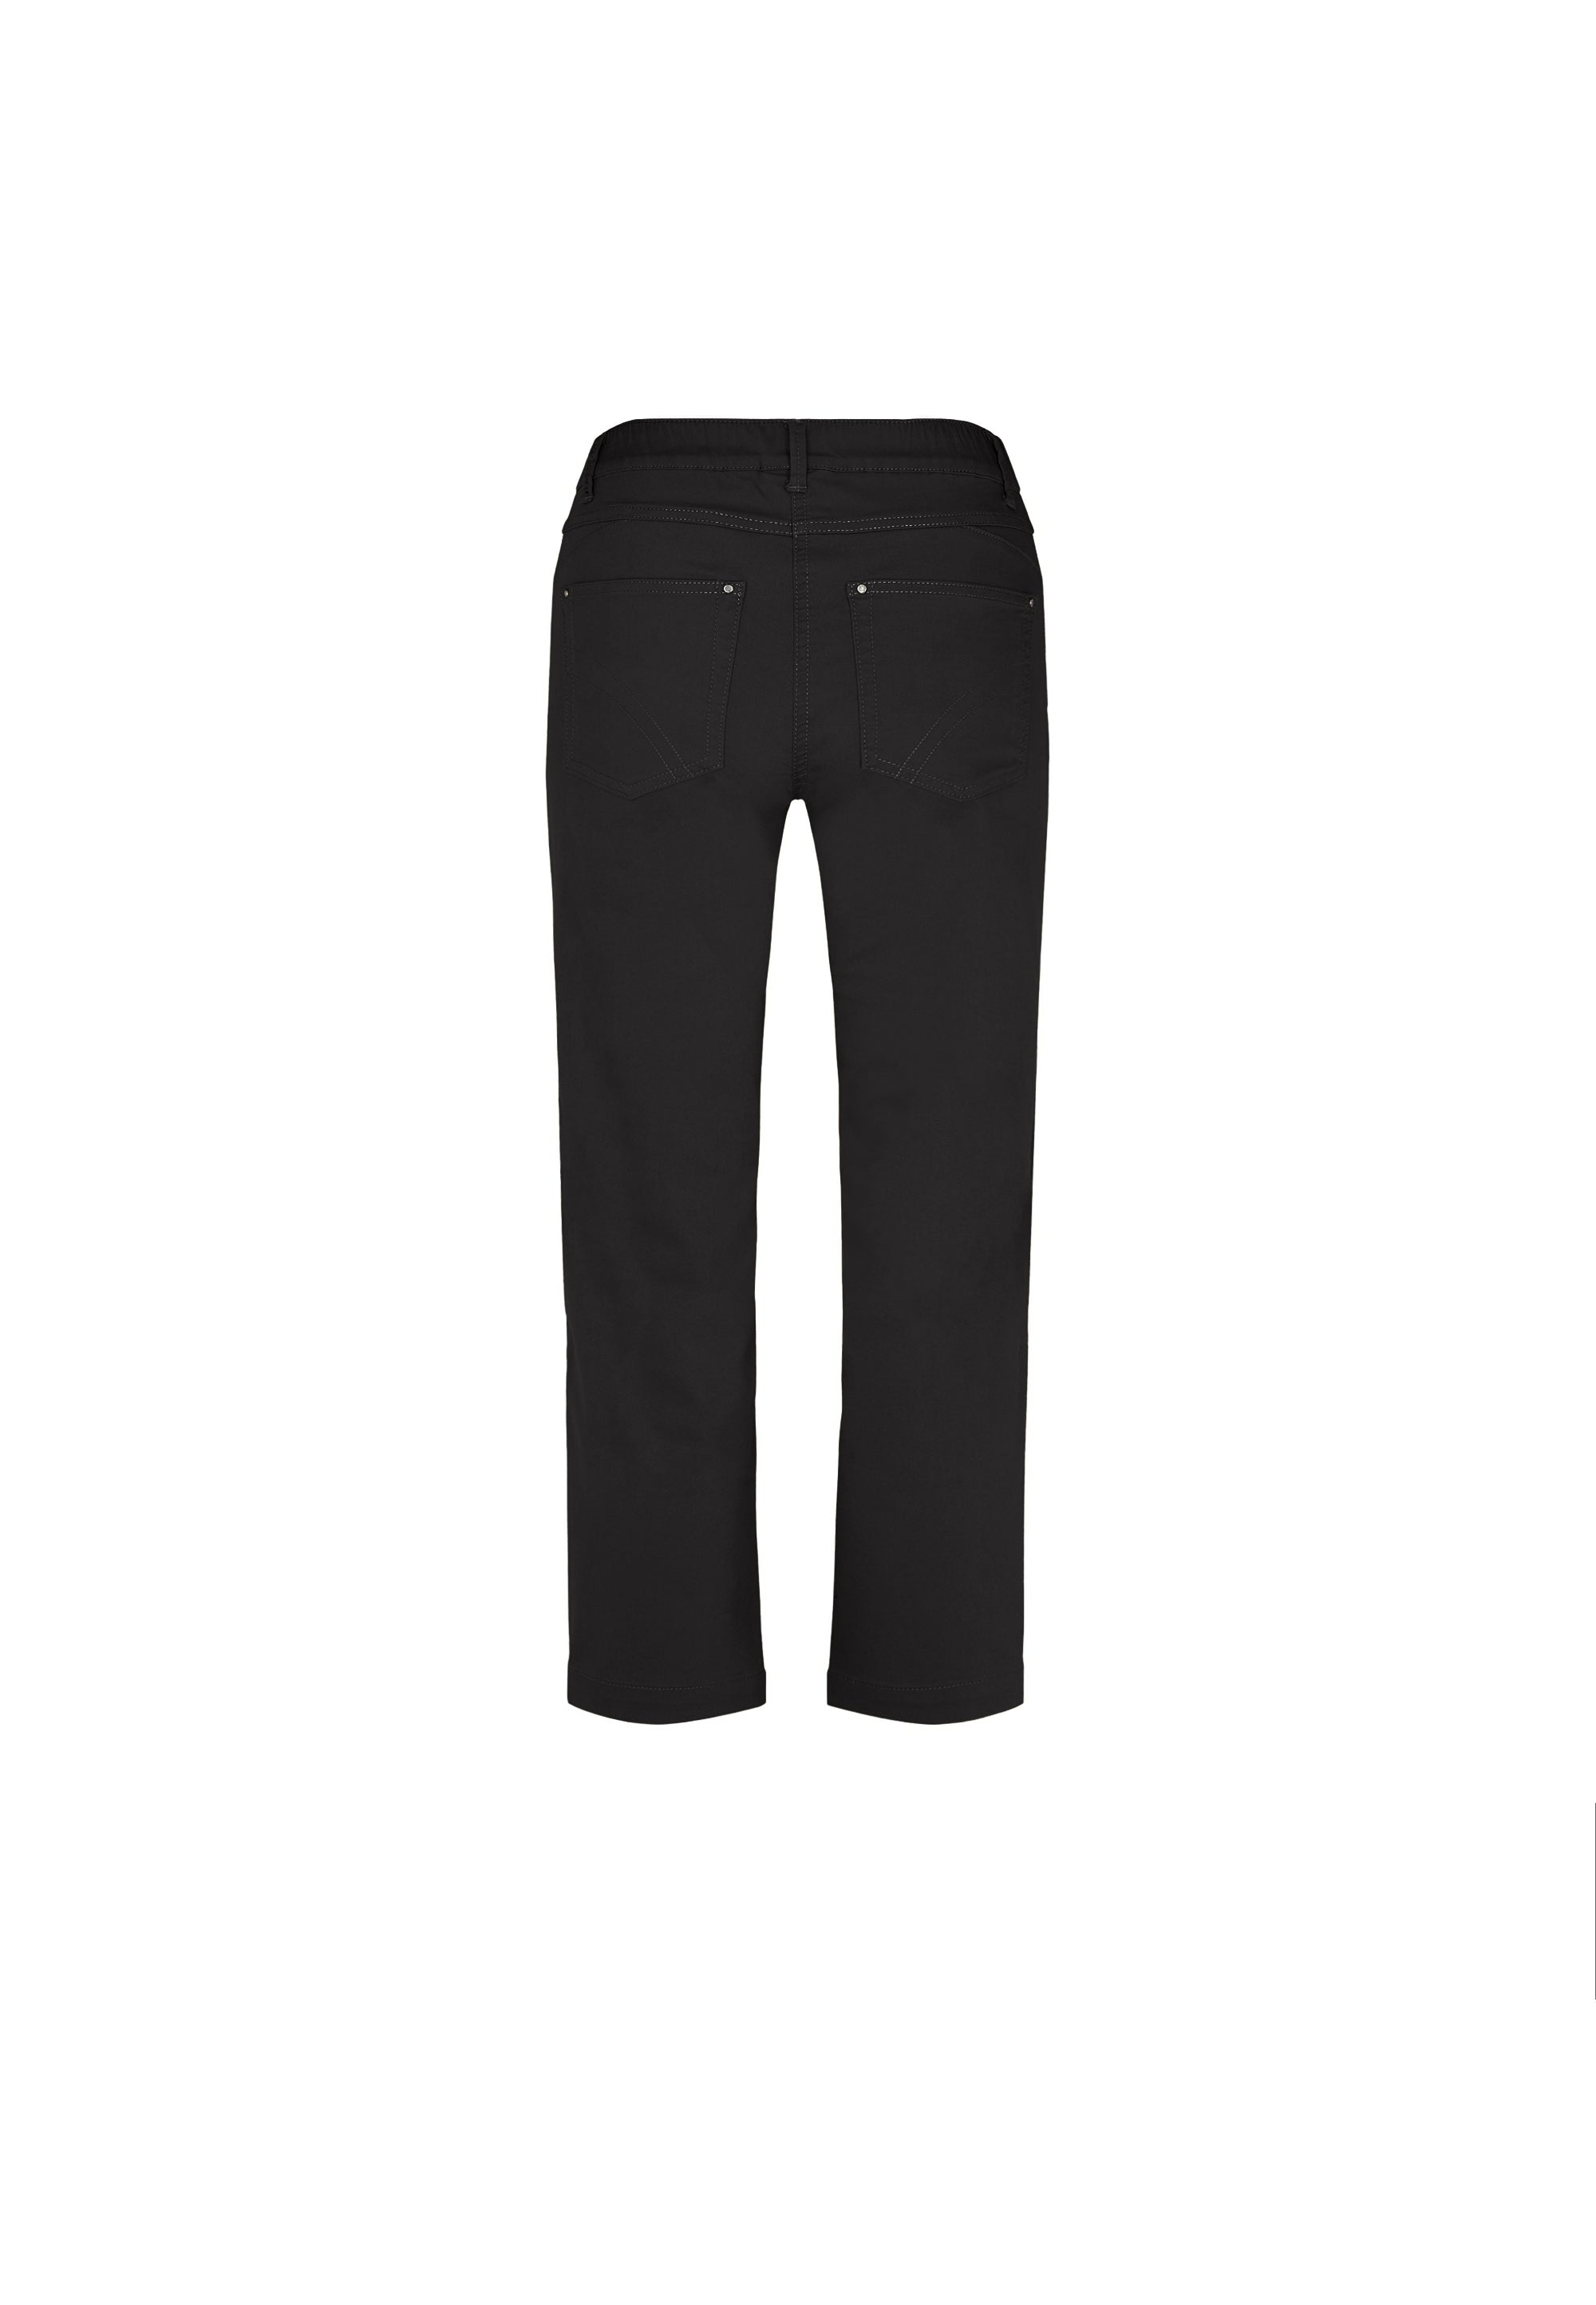 LAURIE Helen Straight - Extra Short Length Trousers STRAIGHT 99000 Black